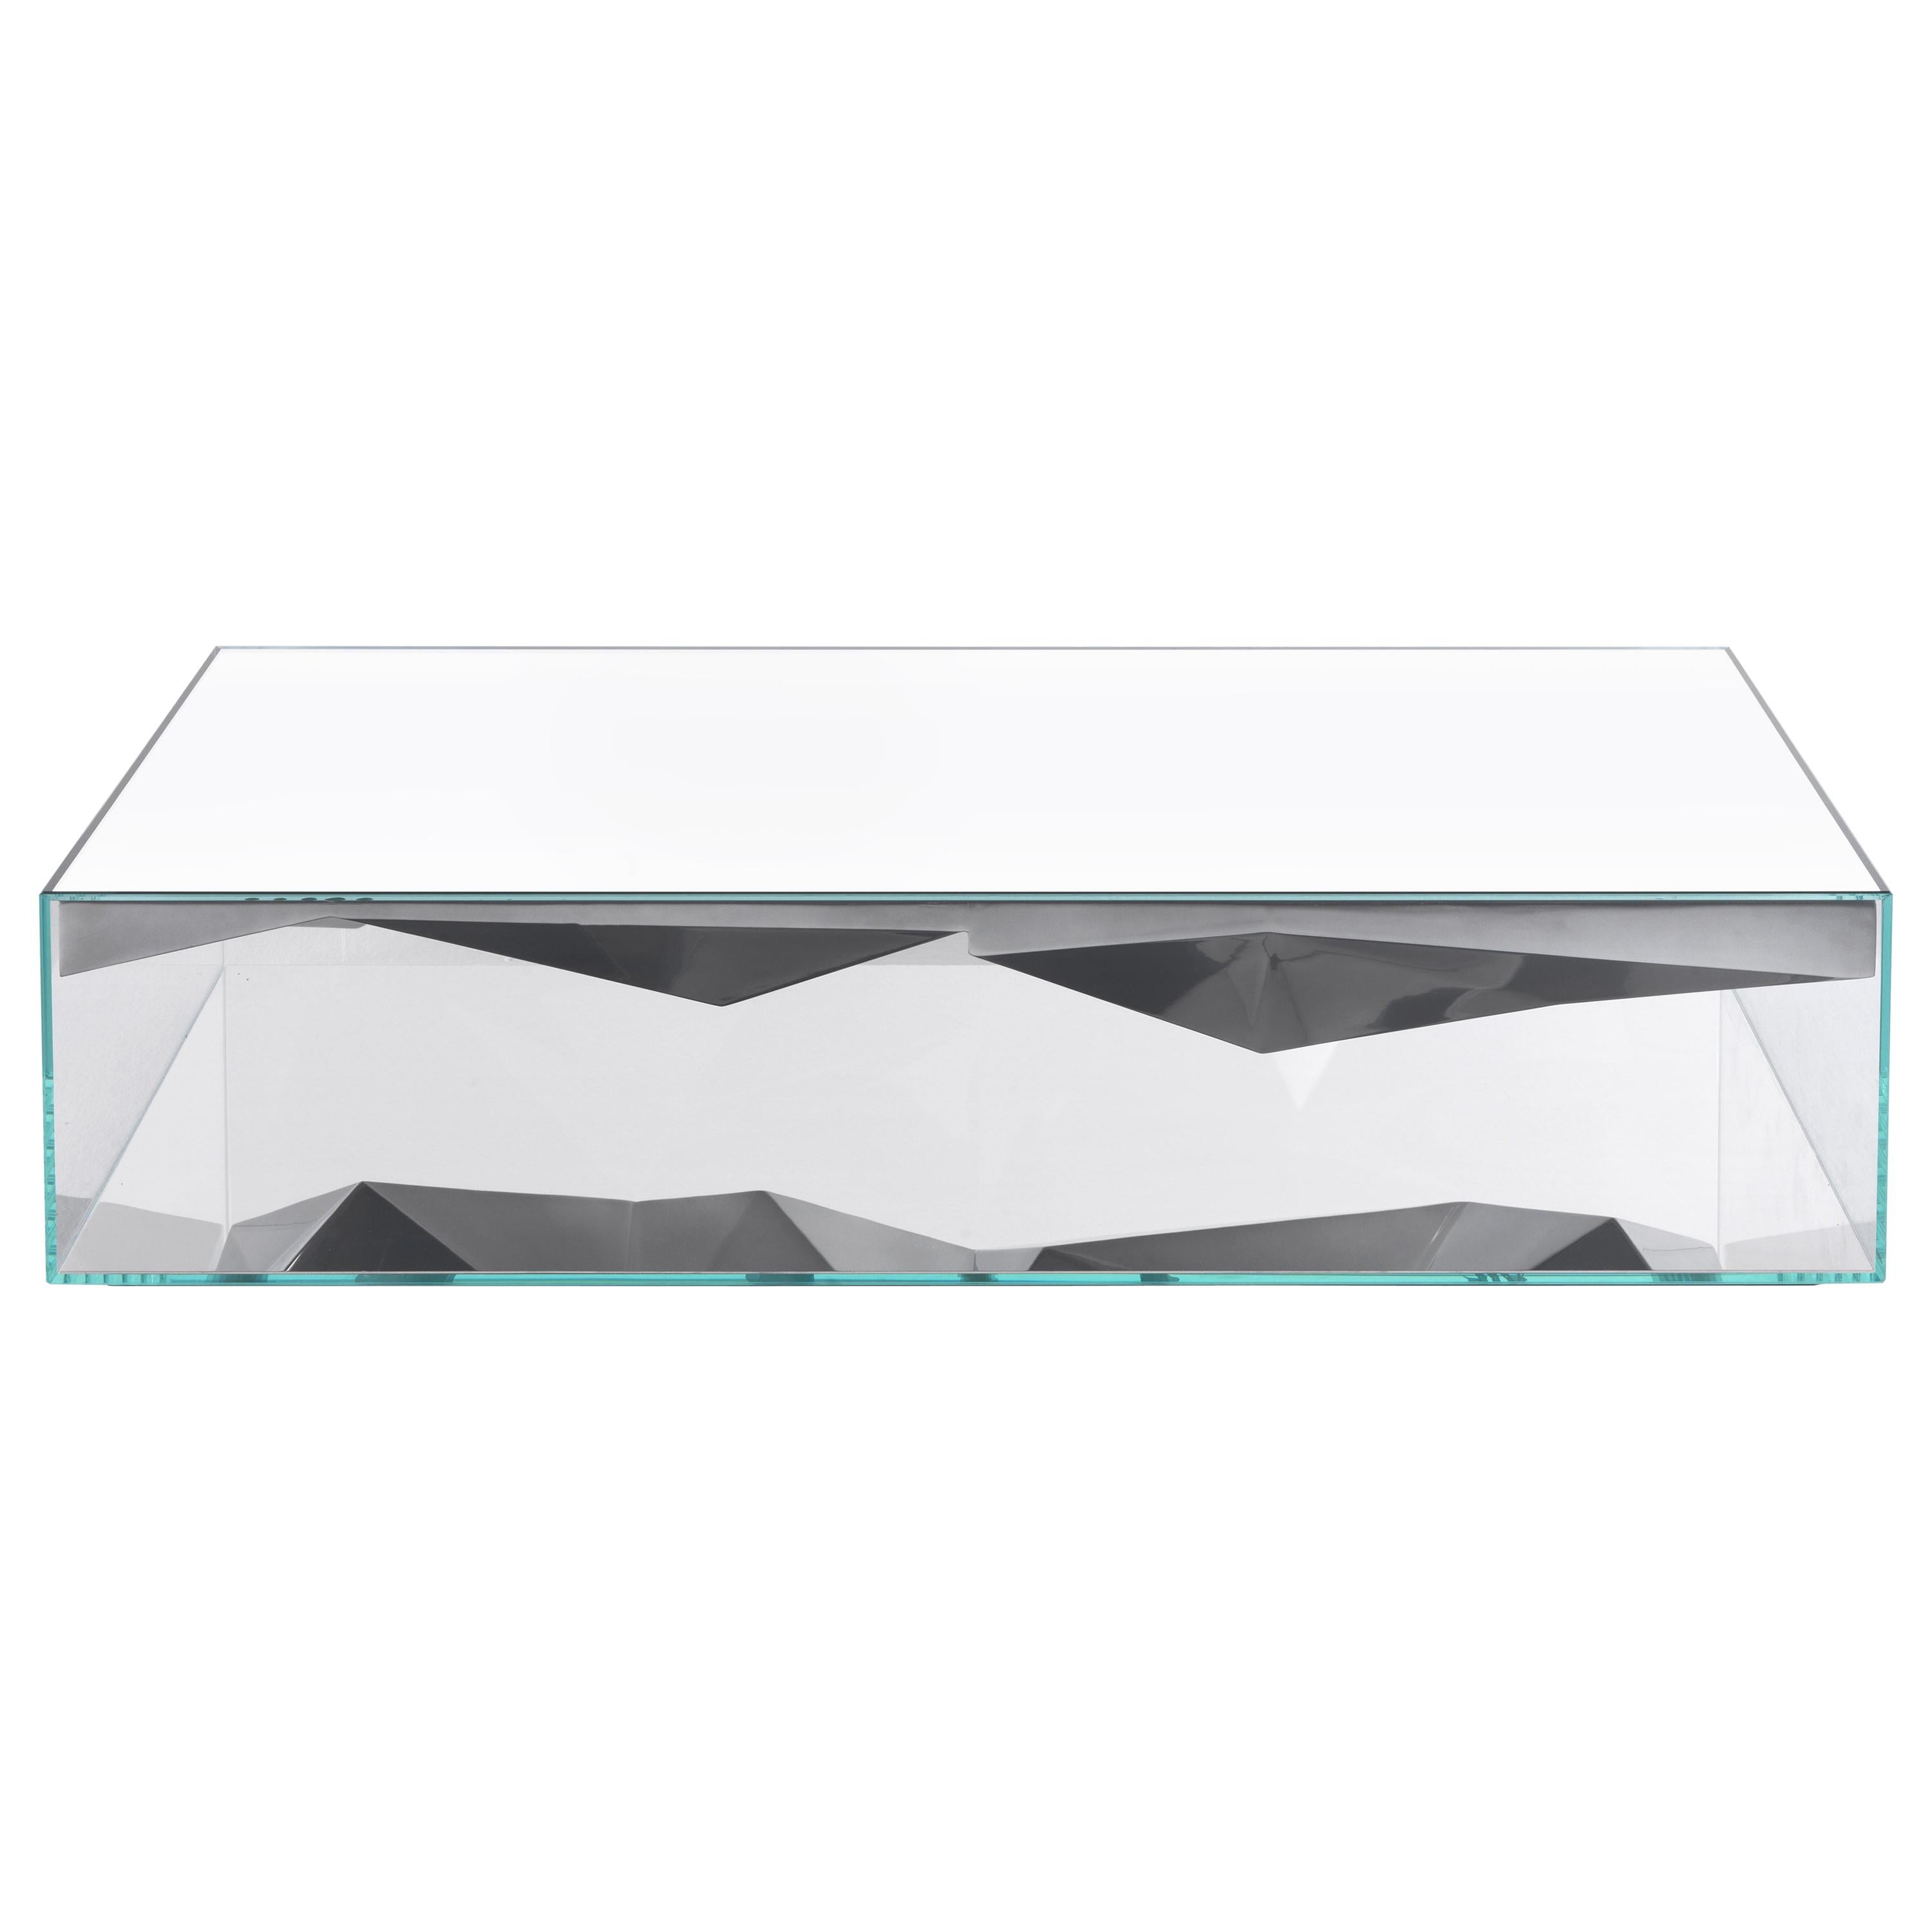 21st Century Dolmlod ‘Rectangular’ Central Table in Glass and Mirror by CTRLZAK For Sale